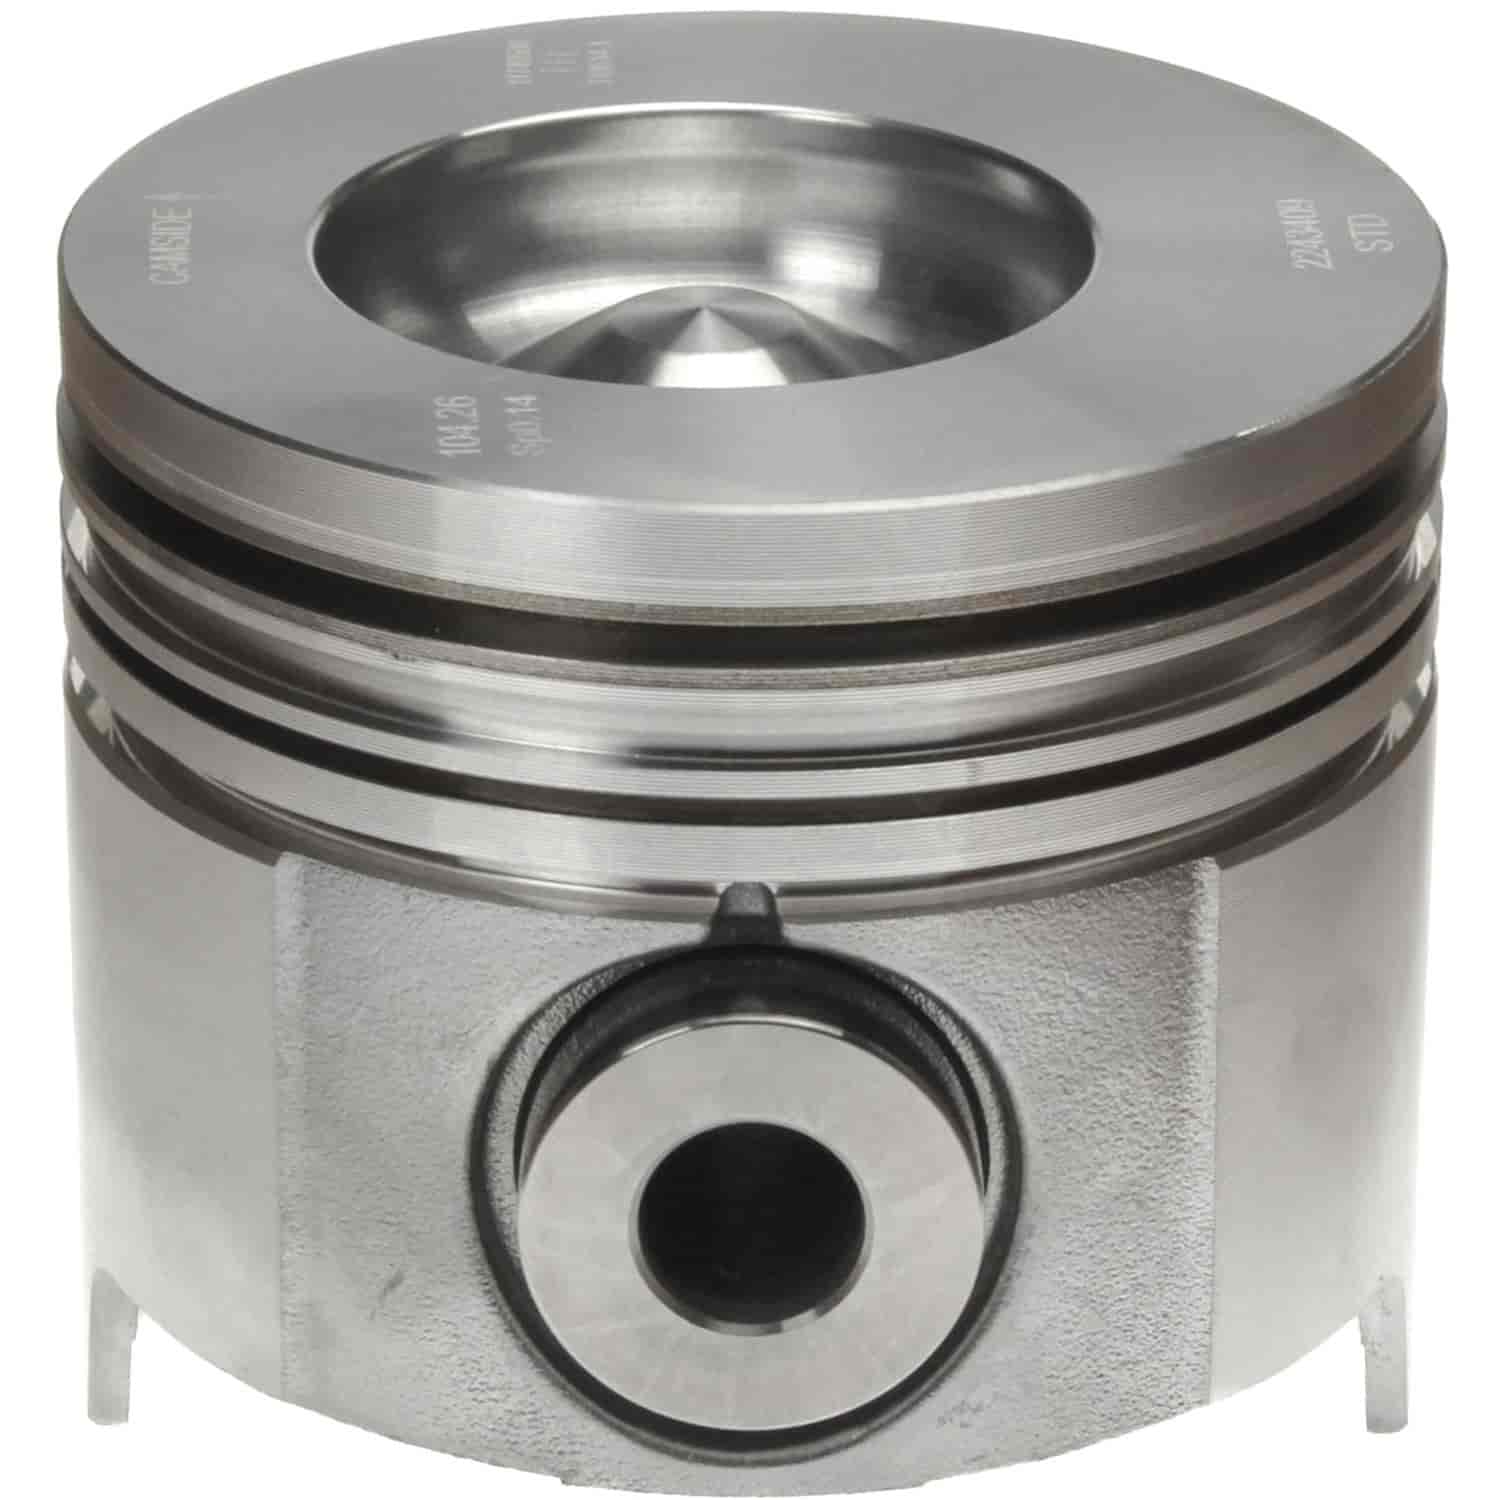 Piston With Rings 1994-2003 Ford/Navistar Powerstroke Diesel V8 7.3L with 4.110" Bore (Standard) Reduced Compression